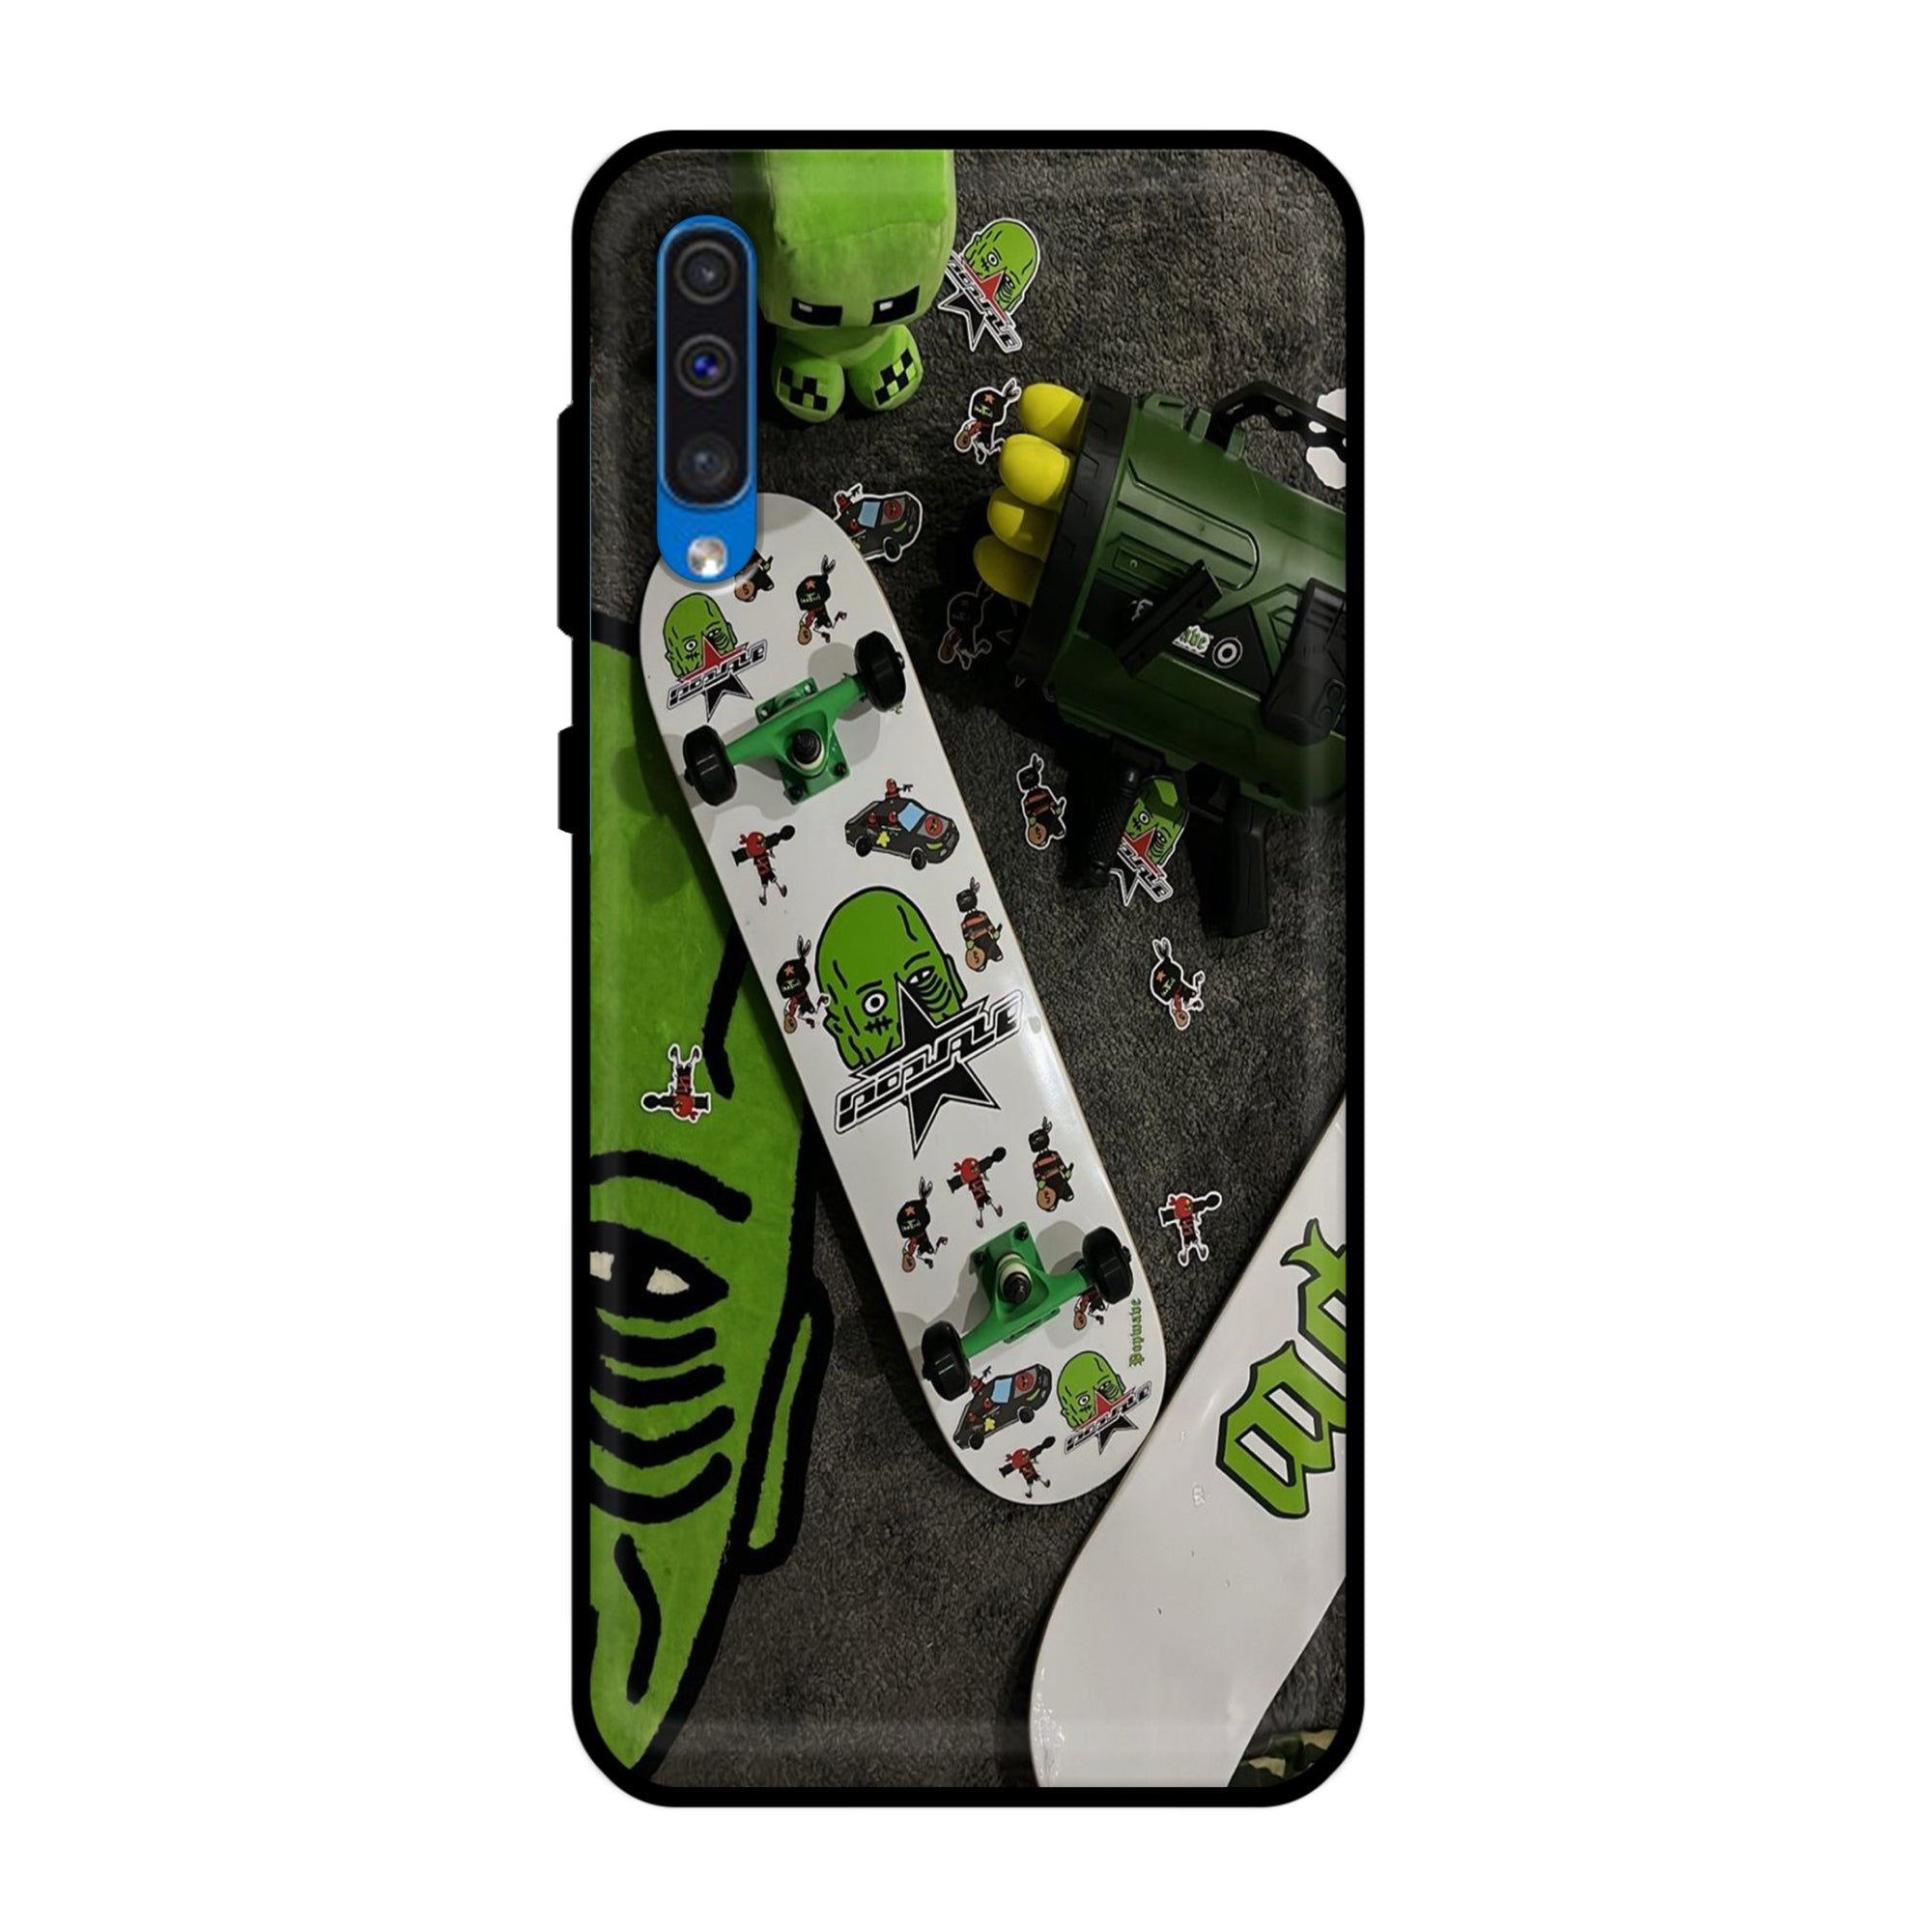 Buy Hulk Skateboard Metal-Silicon Back Mobile Phone Case/Cover For Samsung Galaxy A50 / A50s / A30s Online